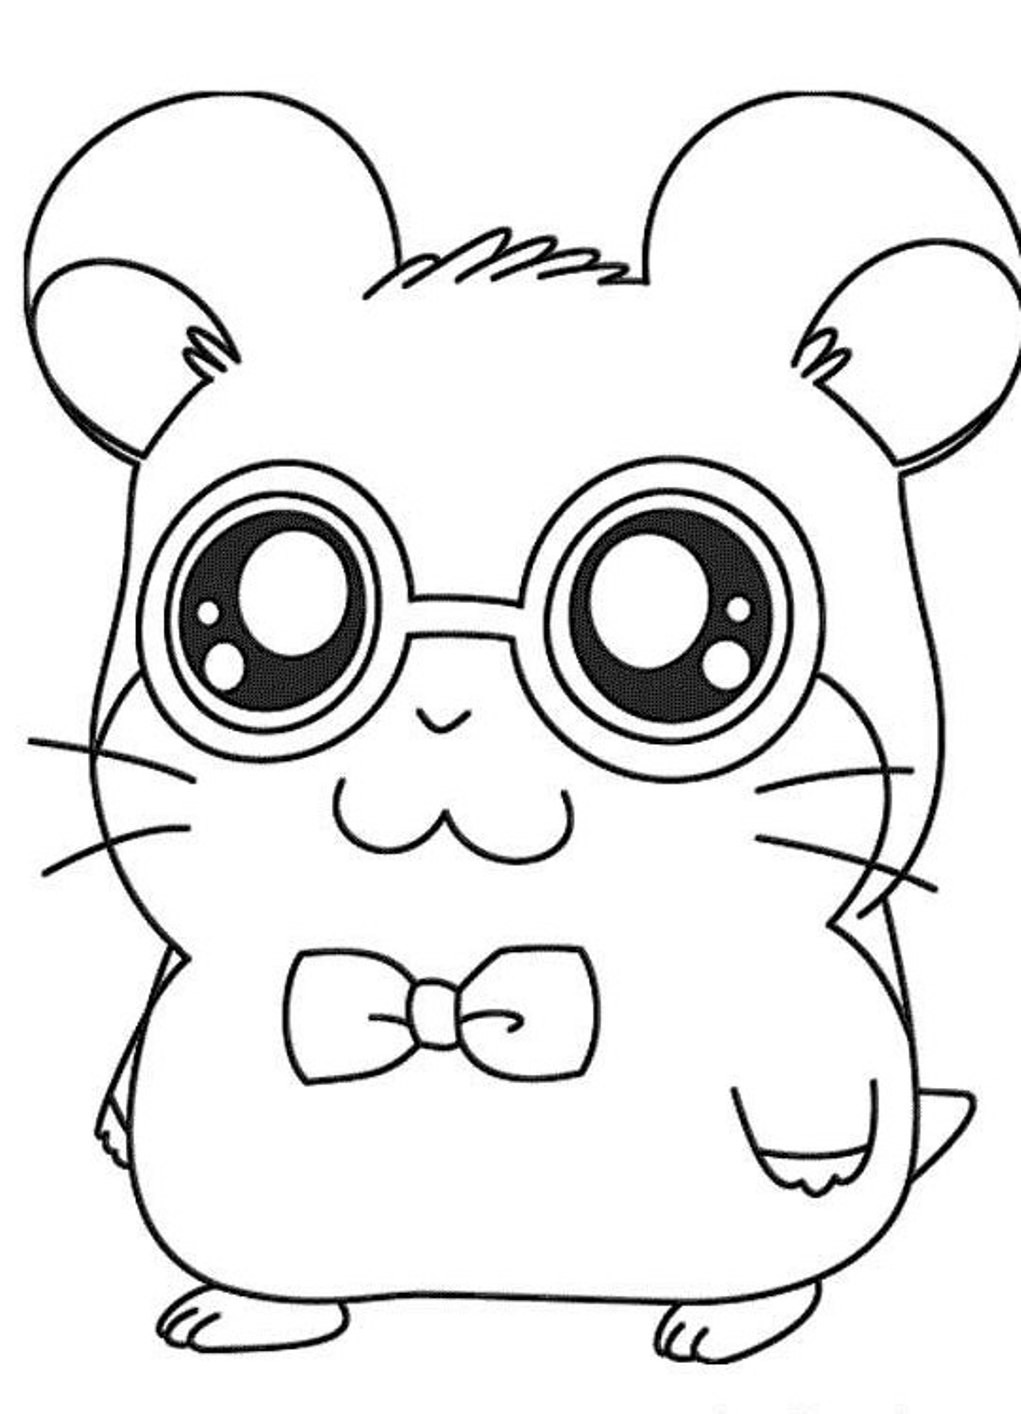 Cute Easy Coloring Pages at GetColorings.com   Free printable colorings ...